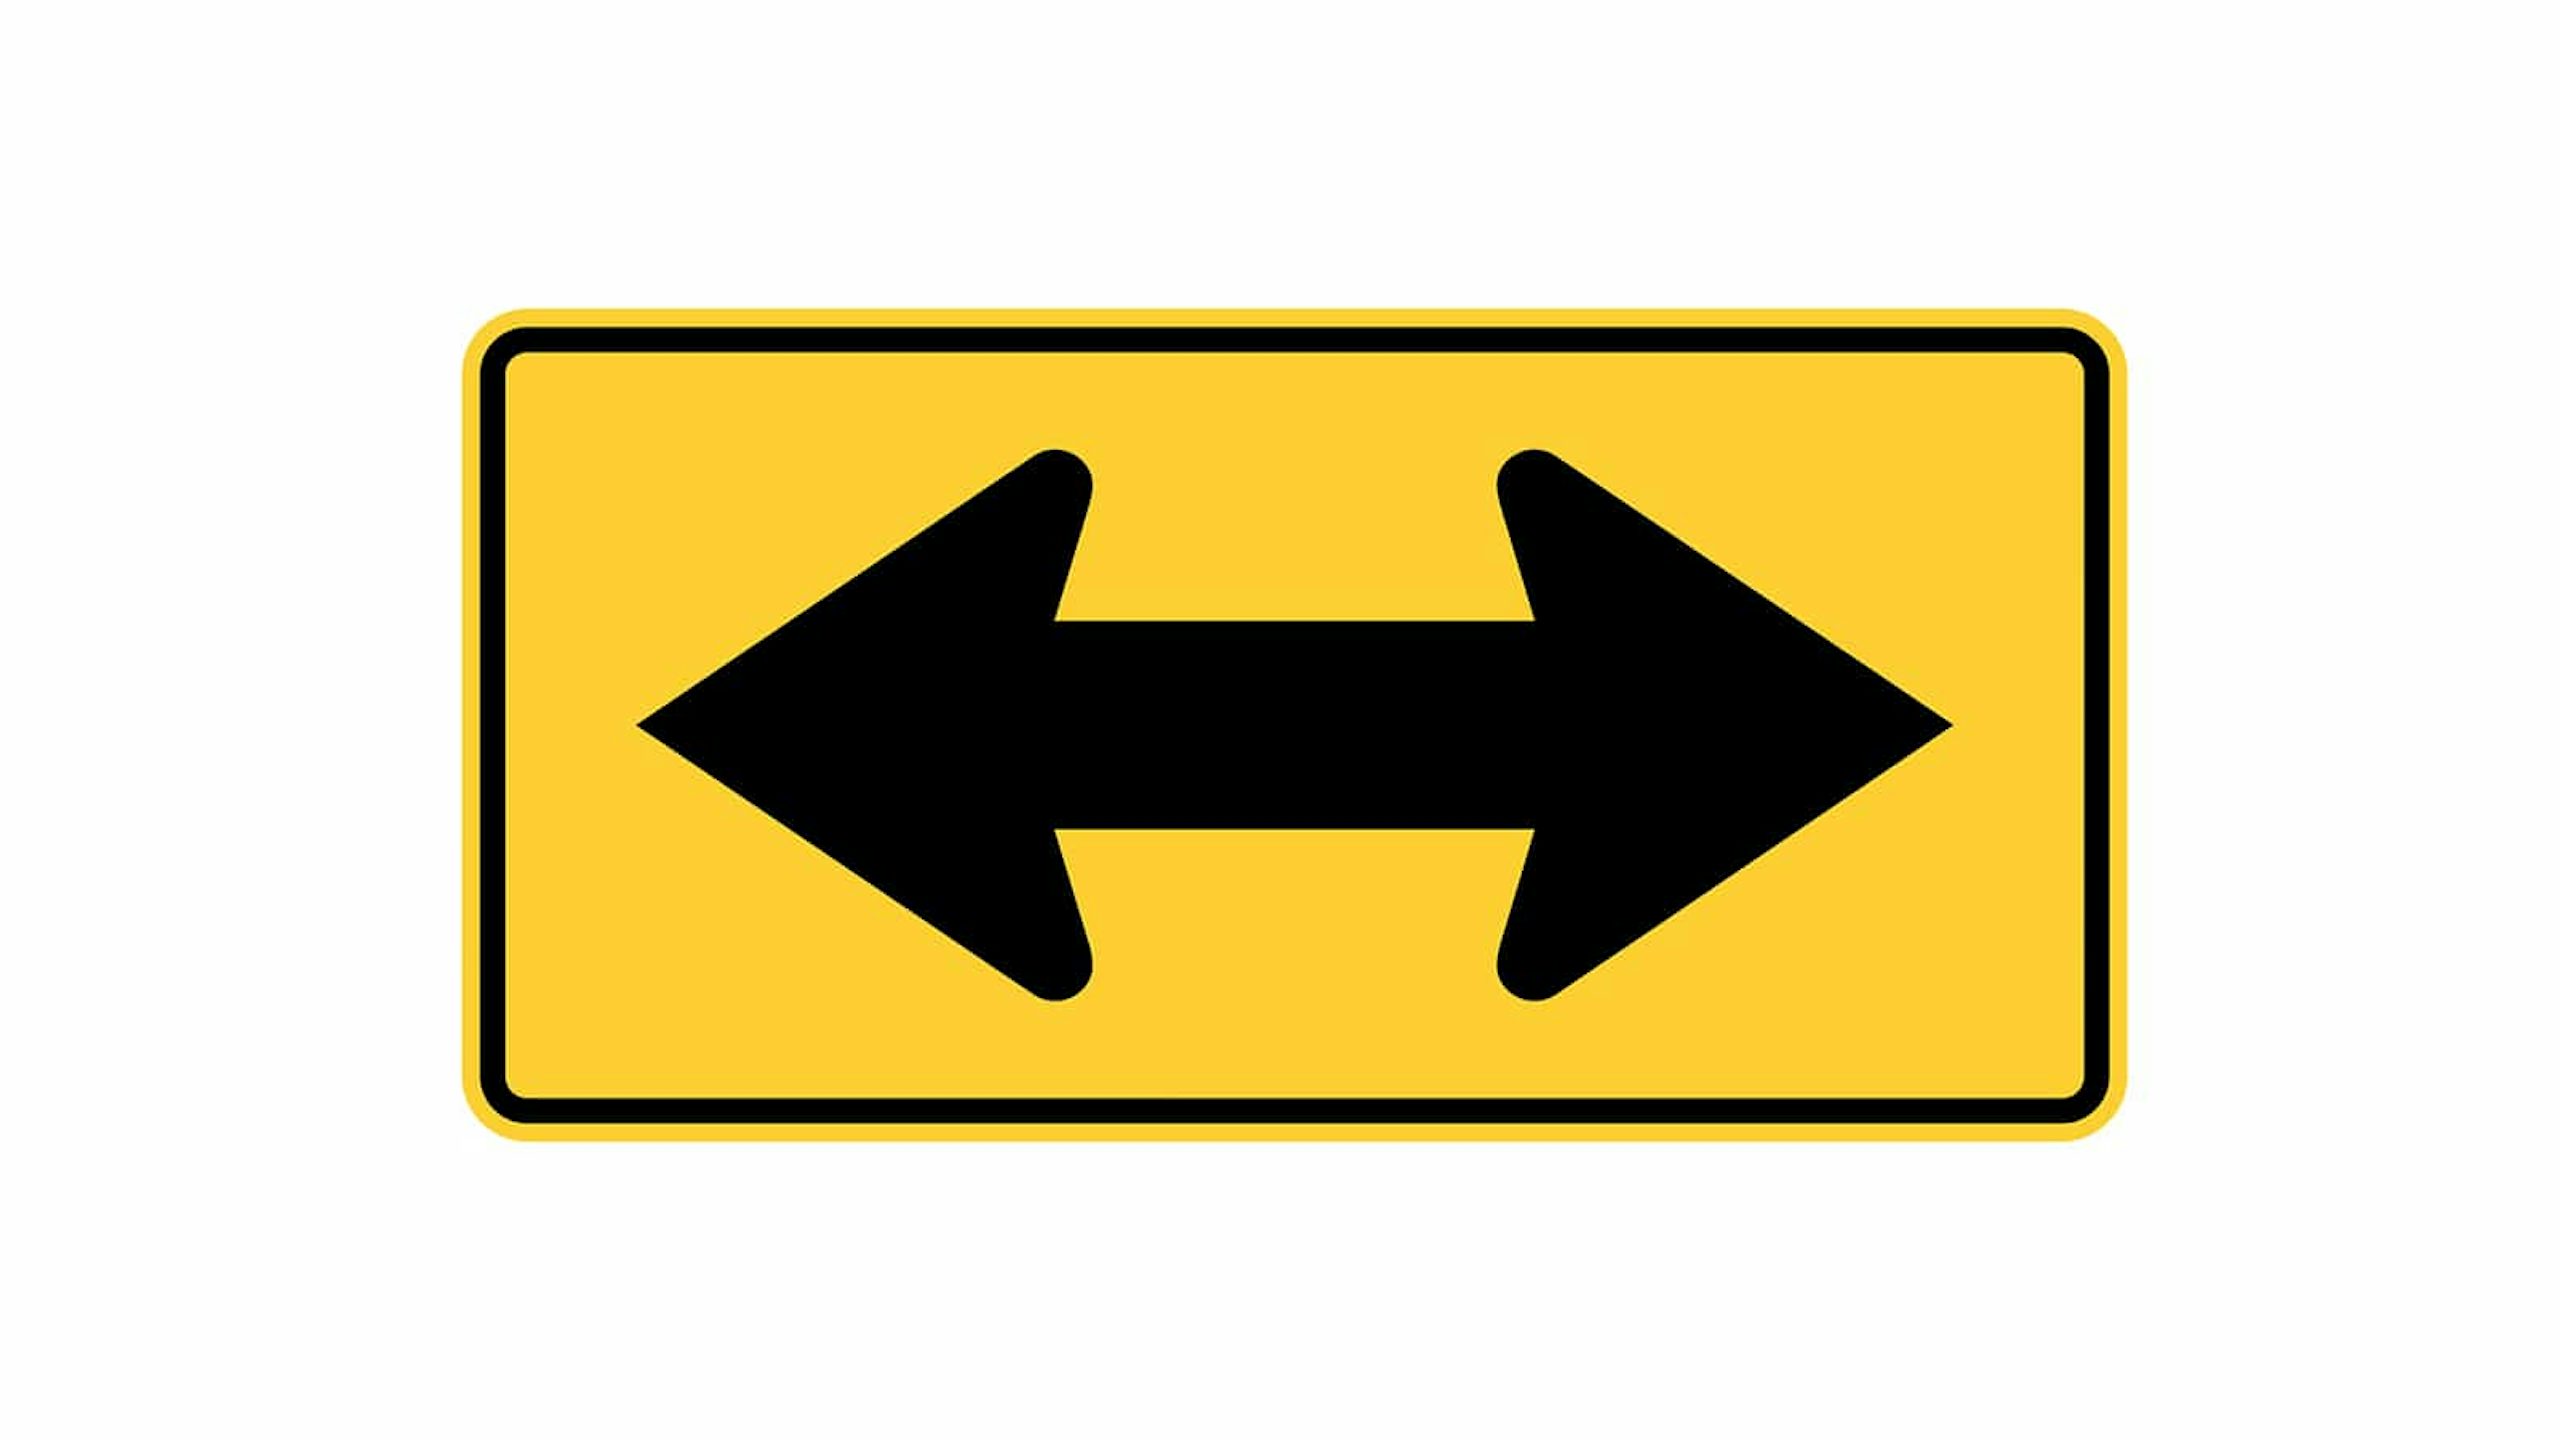 Warning sign Two Directional Arrow